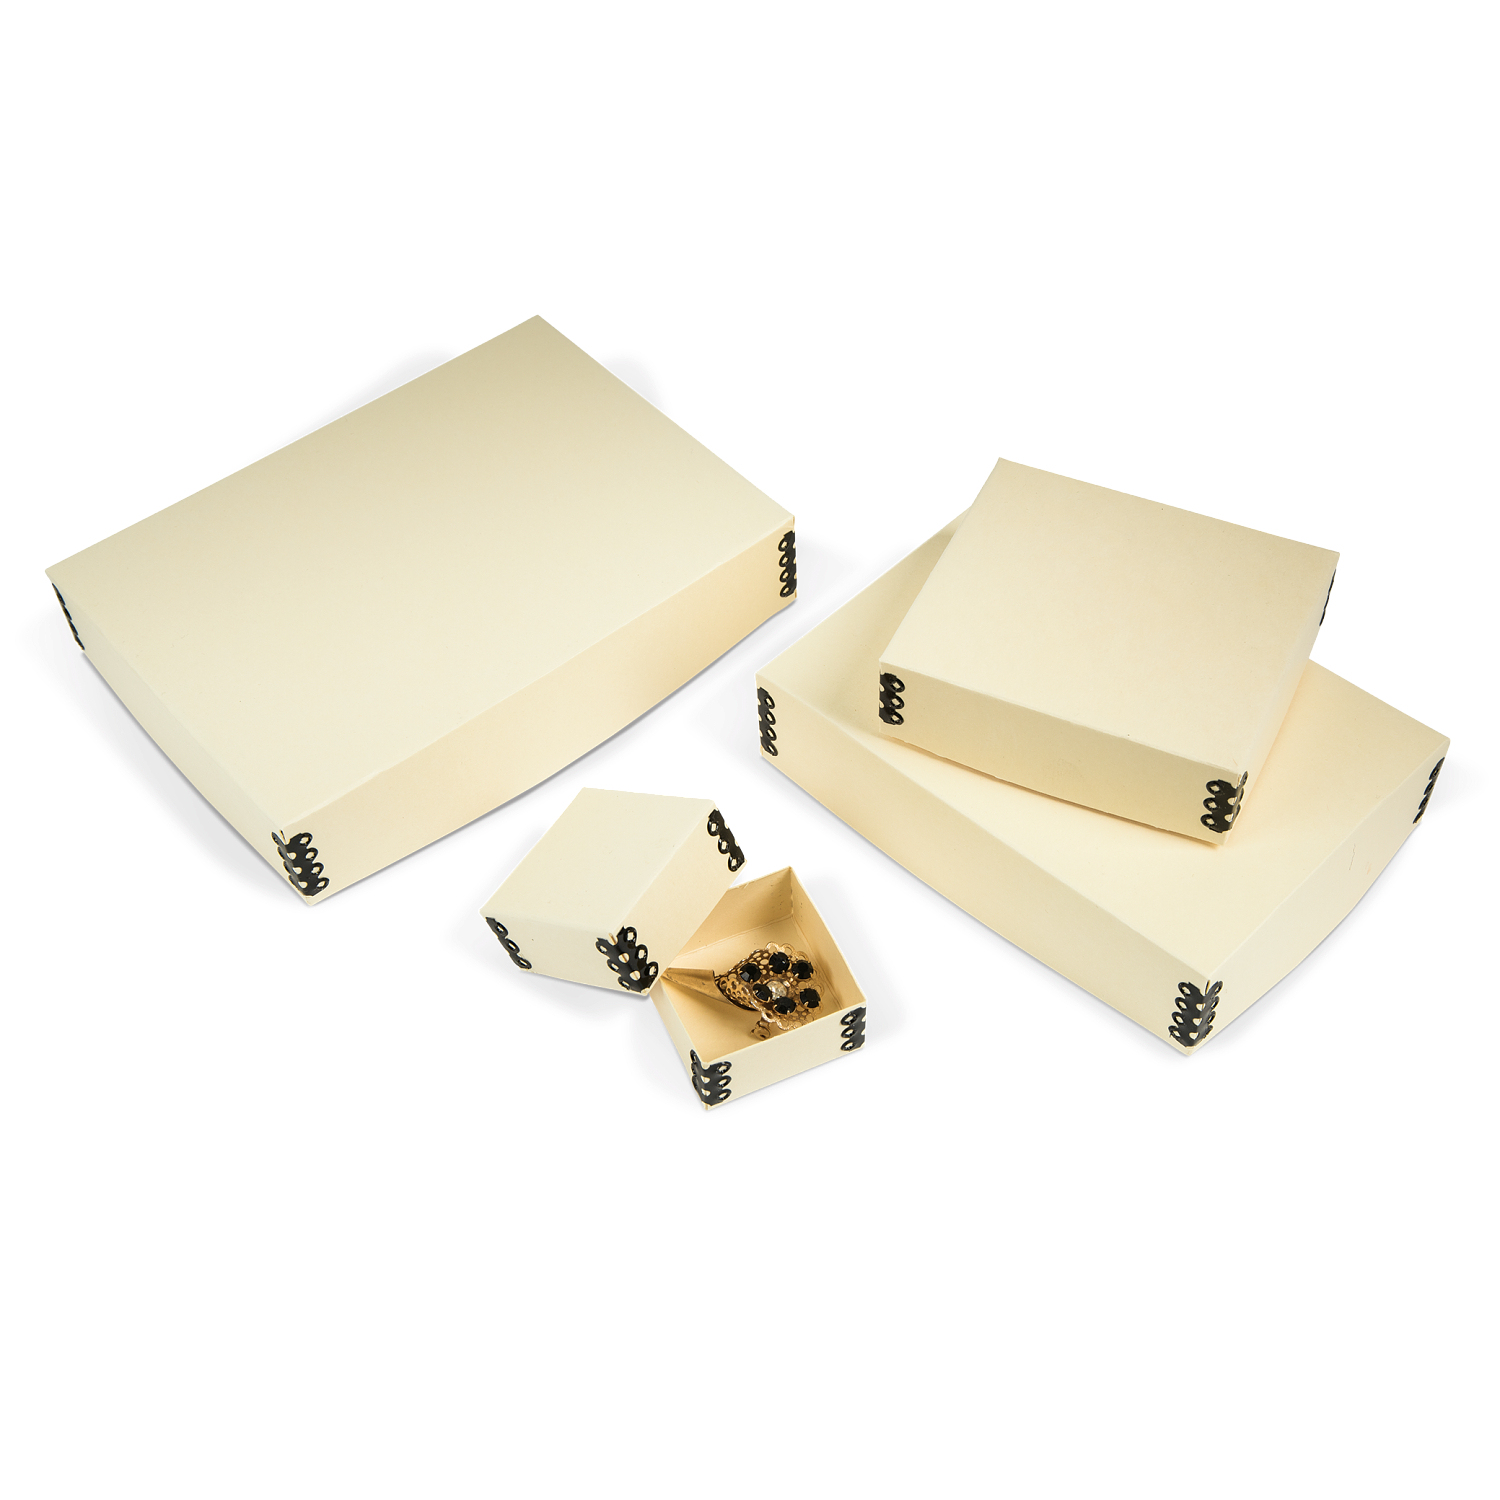 Gaylord Archival® Folder Stock Artifact Boxes (10-Pack)